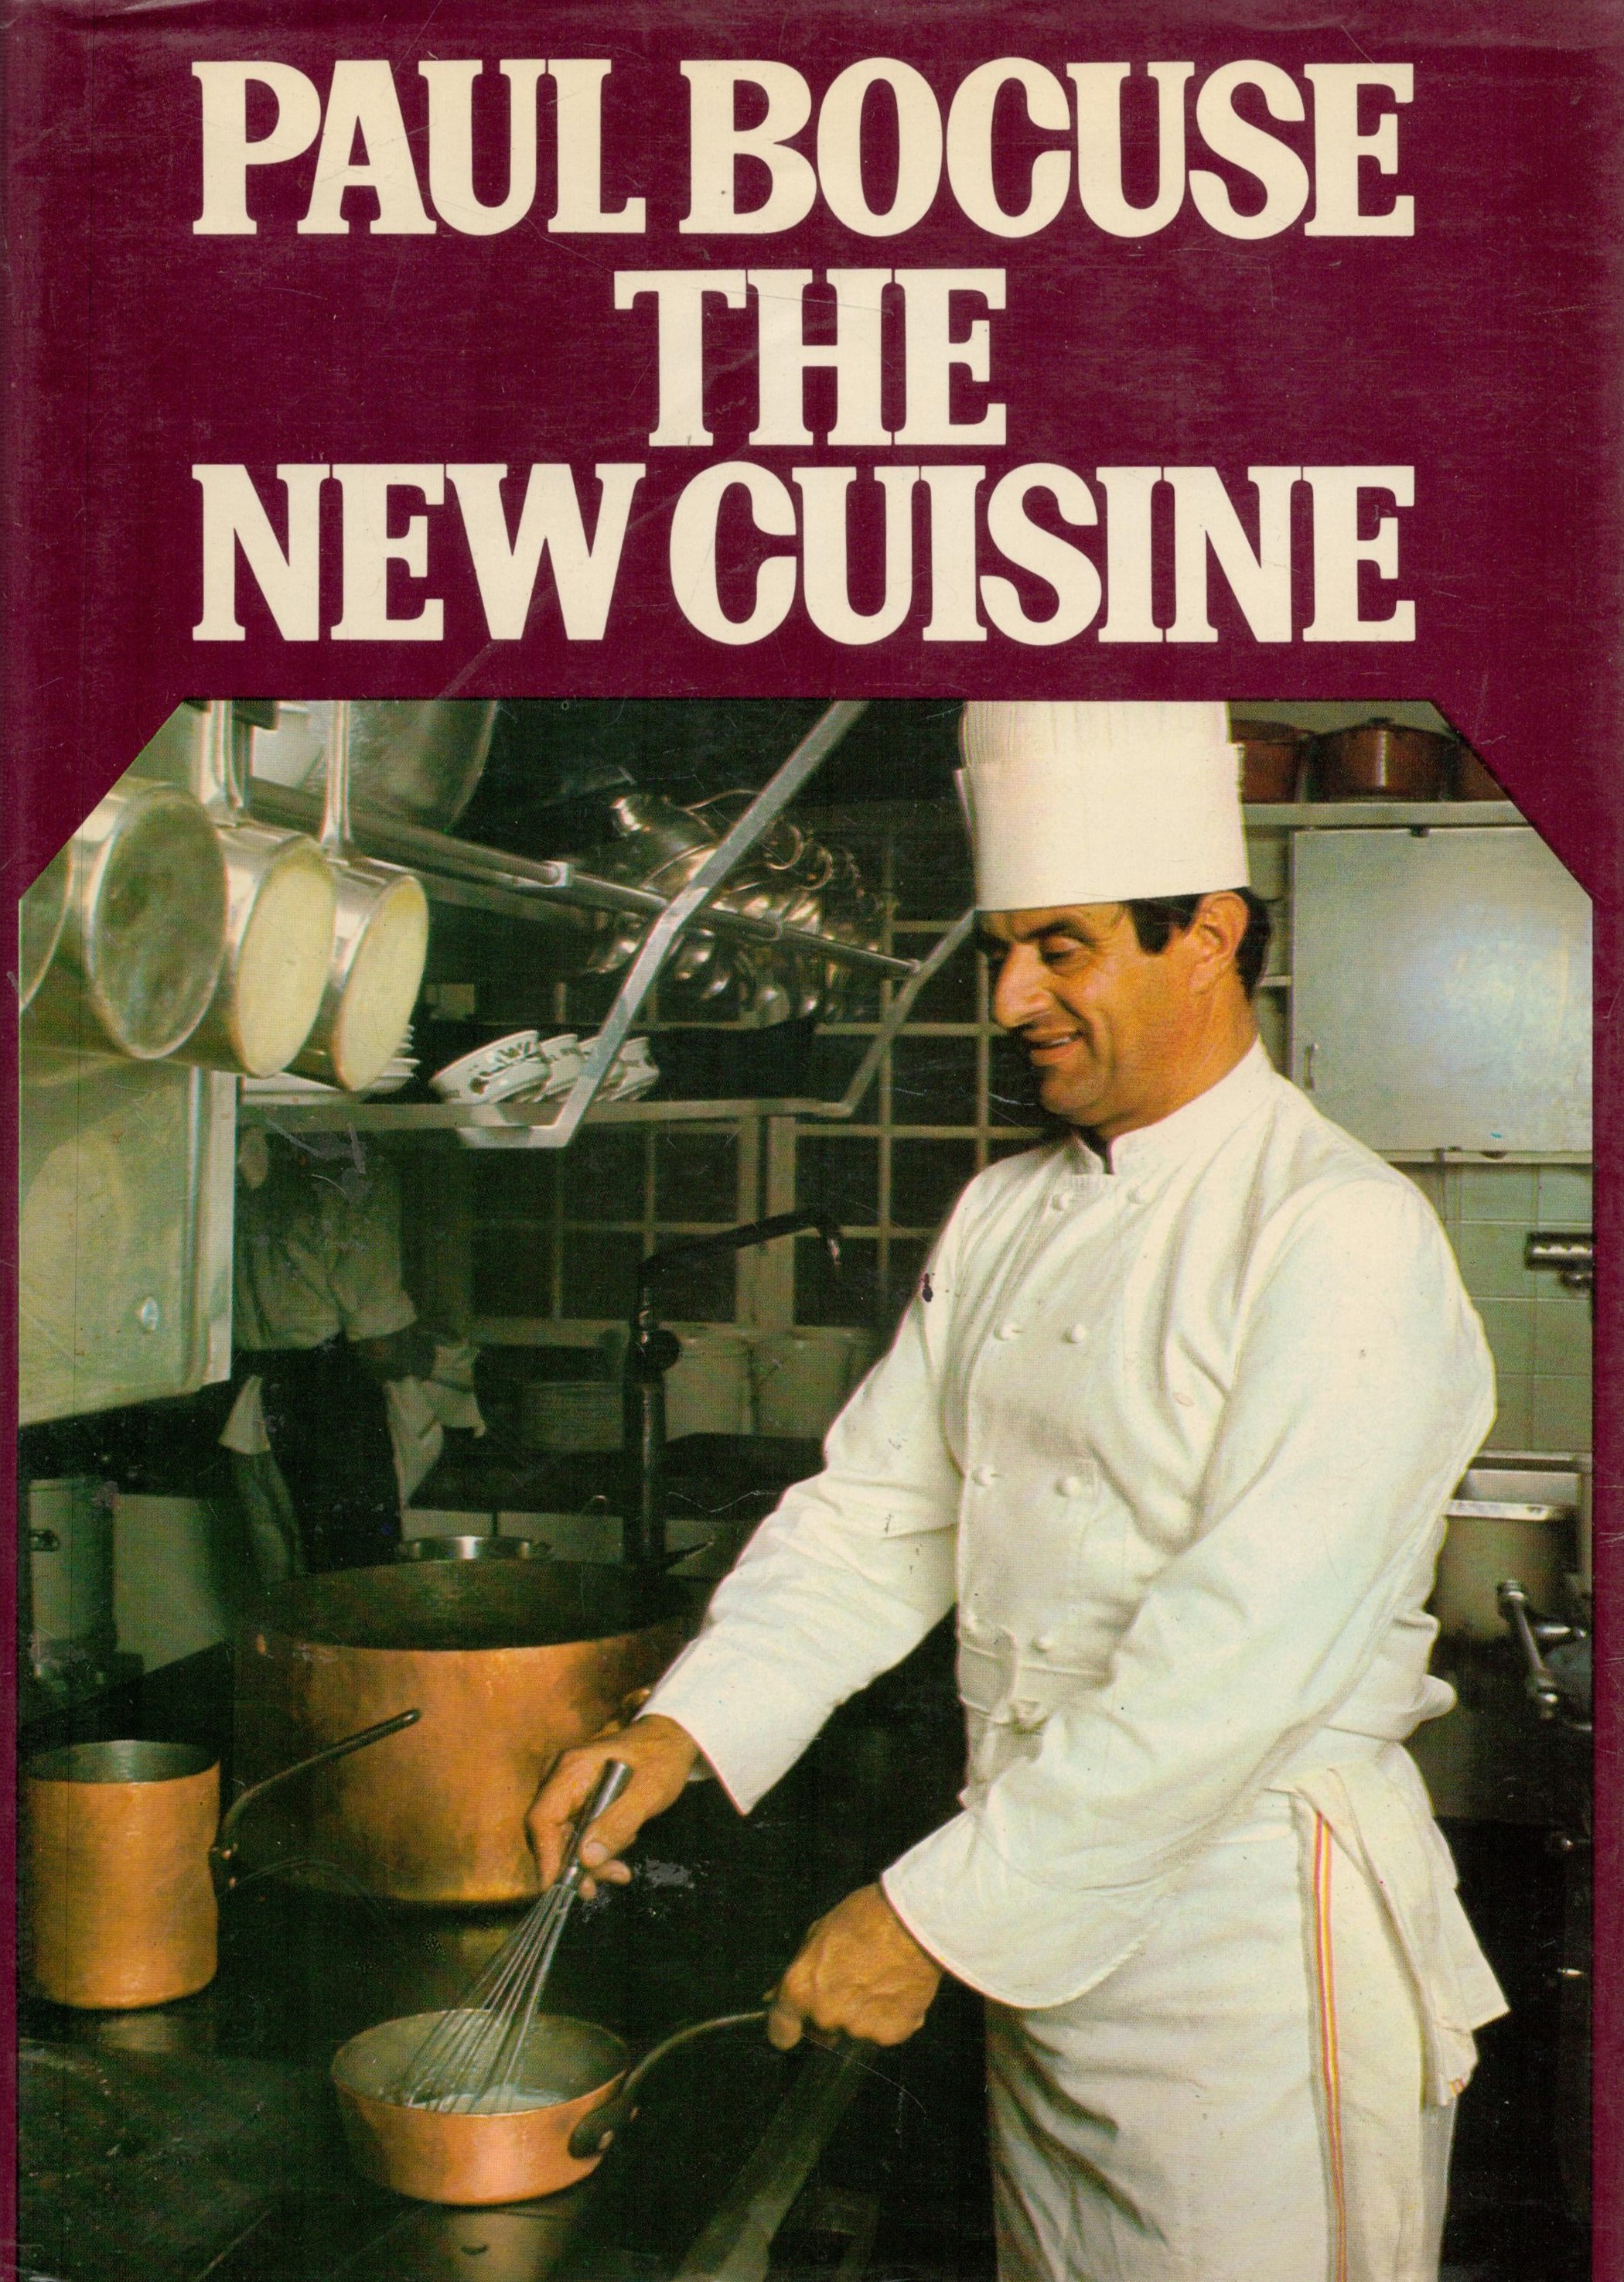 The New Cuisine by Paul Bocuse 1978 First Edition Hardback Book with 672 pages published by